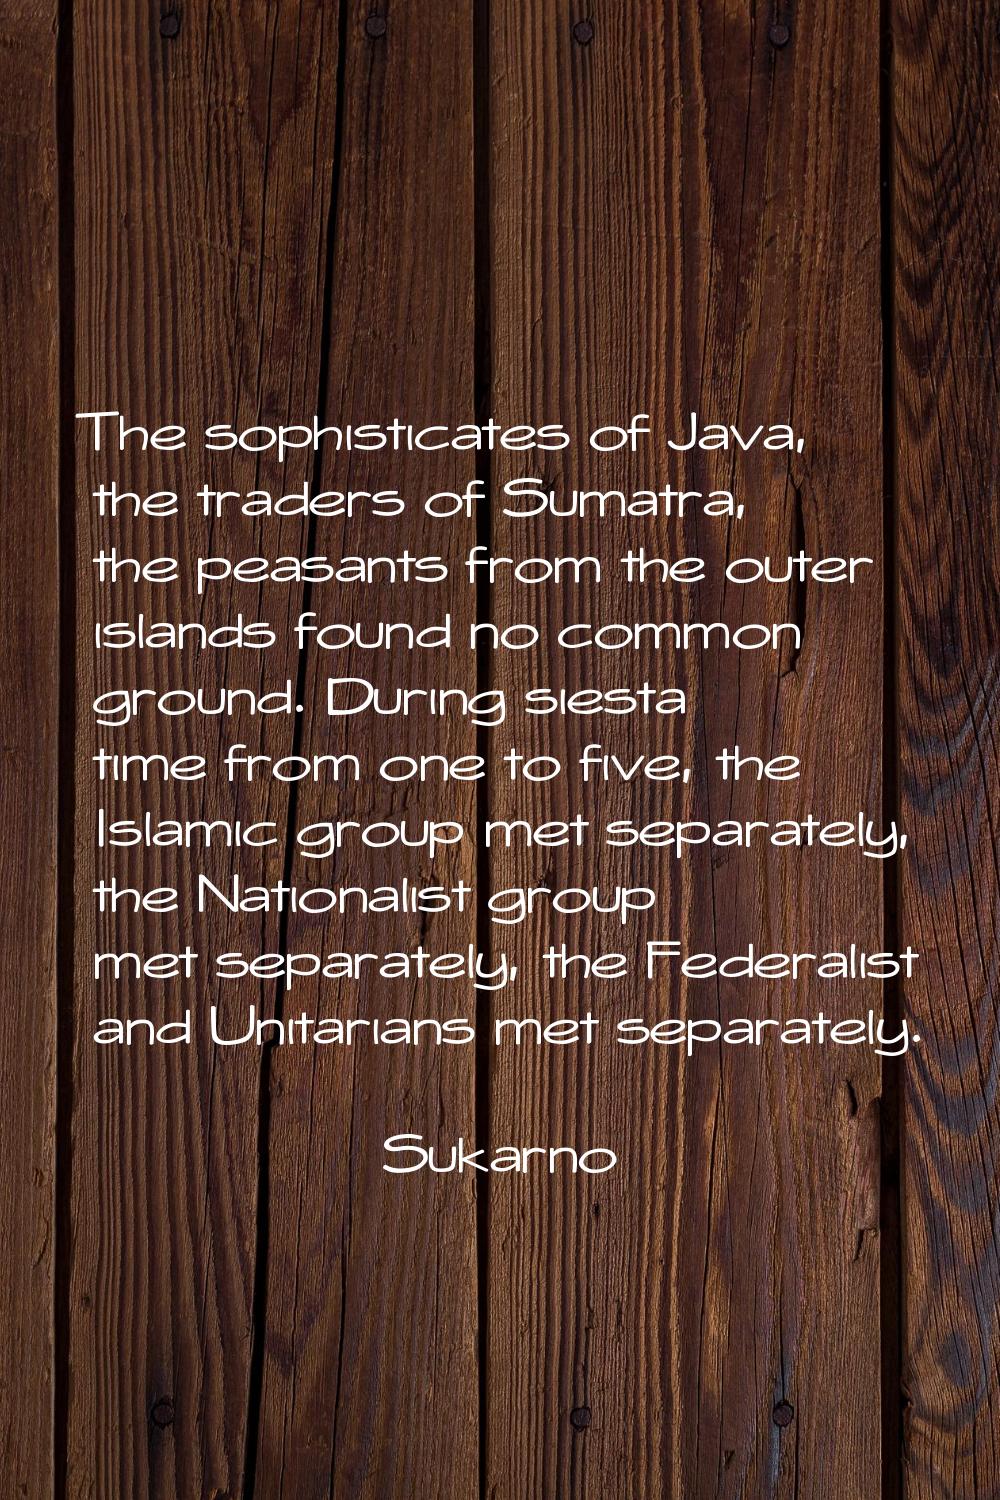 The sophisticates of Java, the traders of Sumatra, the peasants from the outer islands found no com